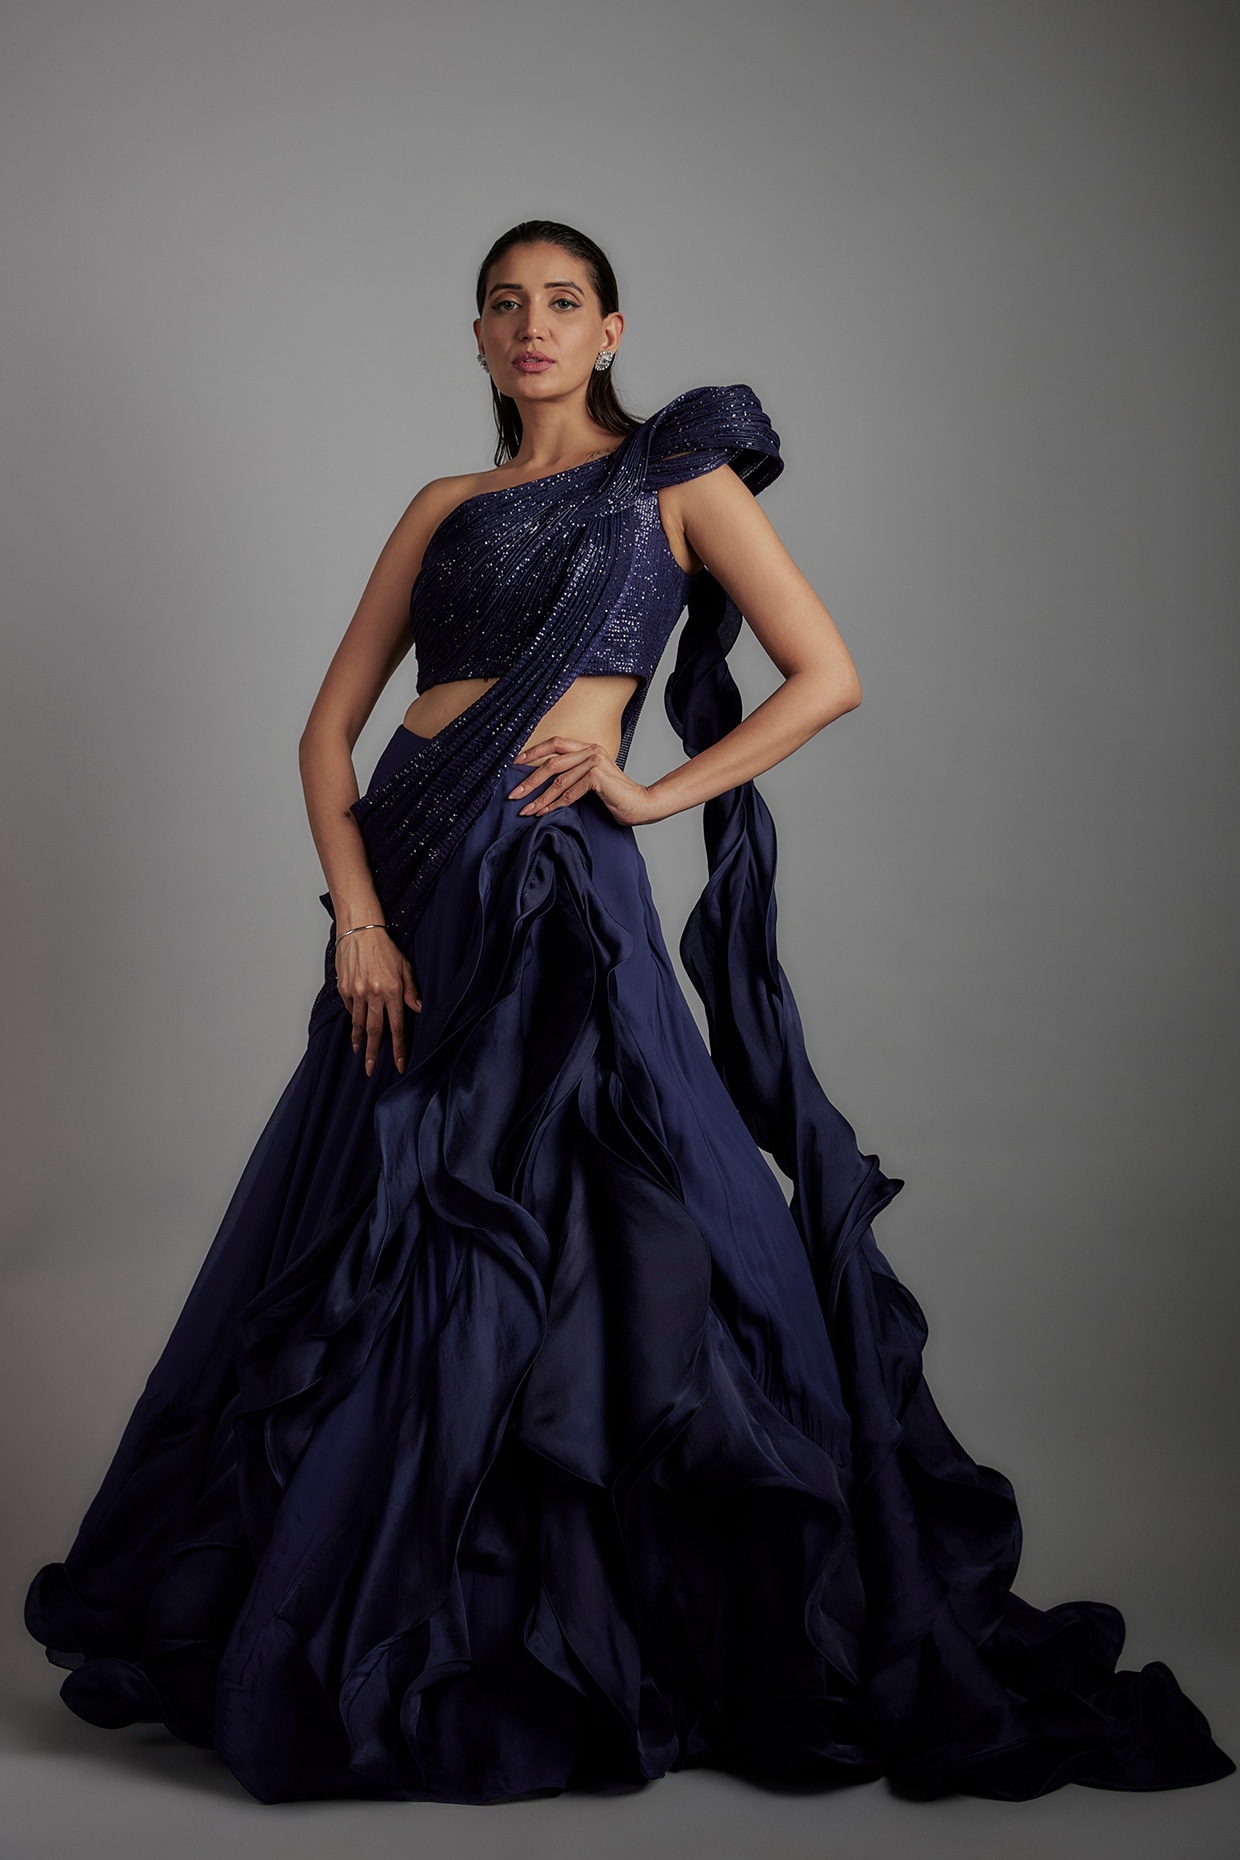 Ruched - Gaurav Gupta 2021/22 Couture | Glamour dress, Office wear dresses,  Western dresses for girl